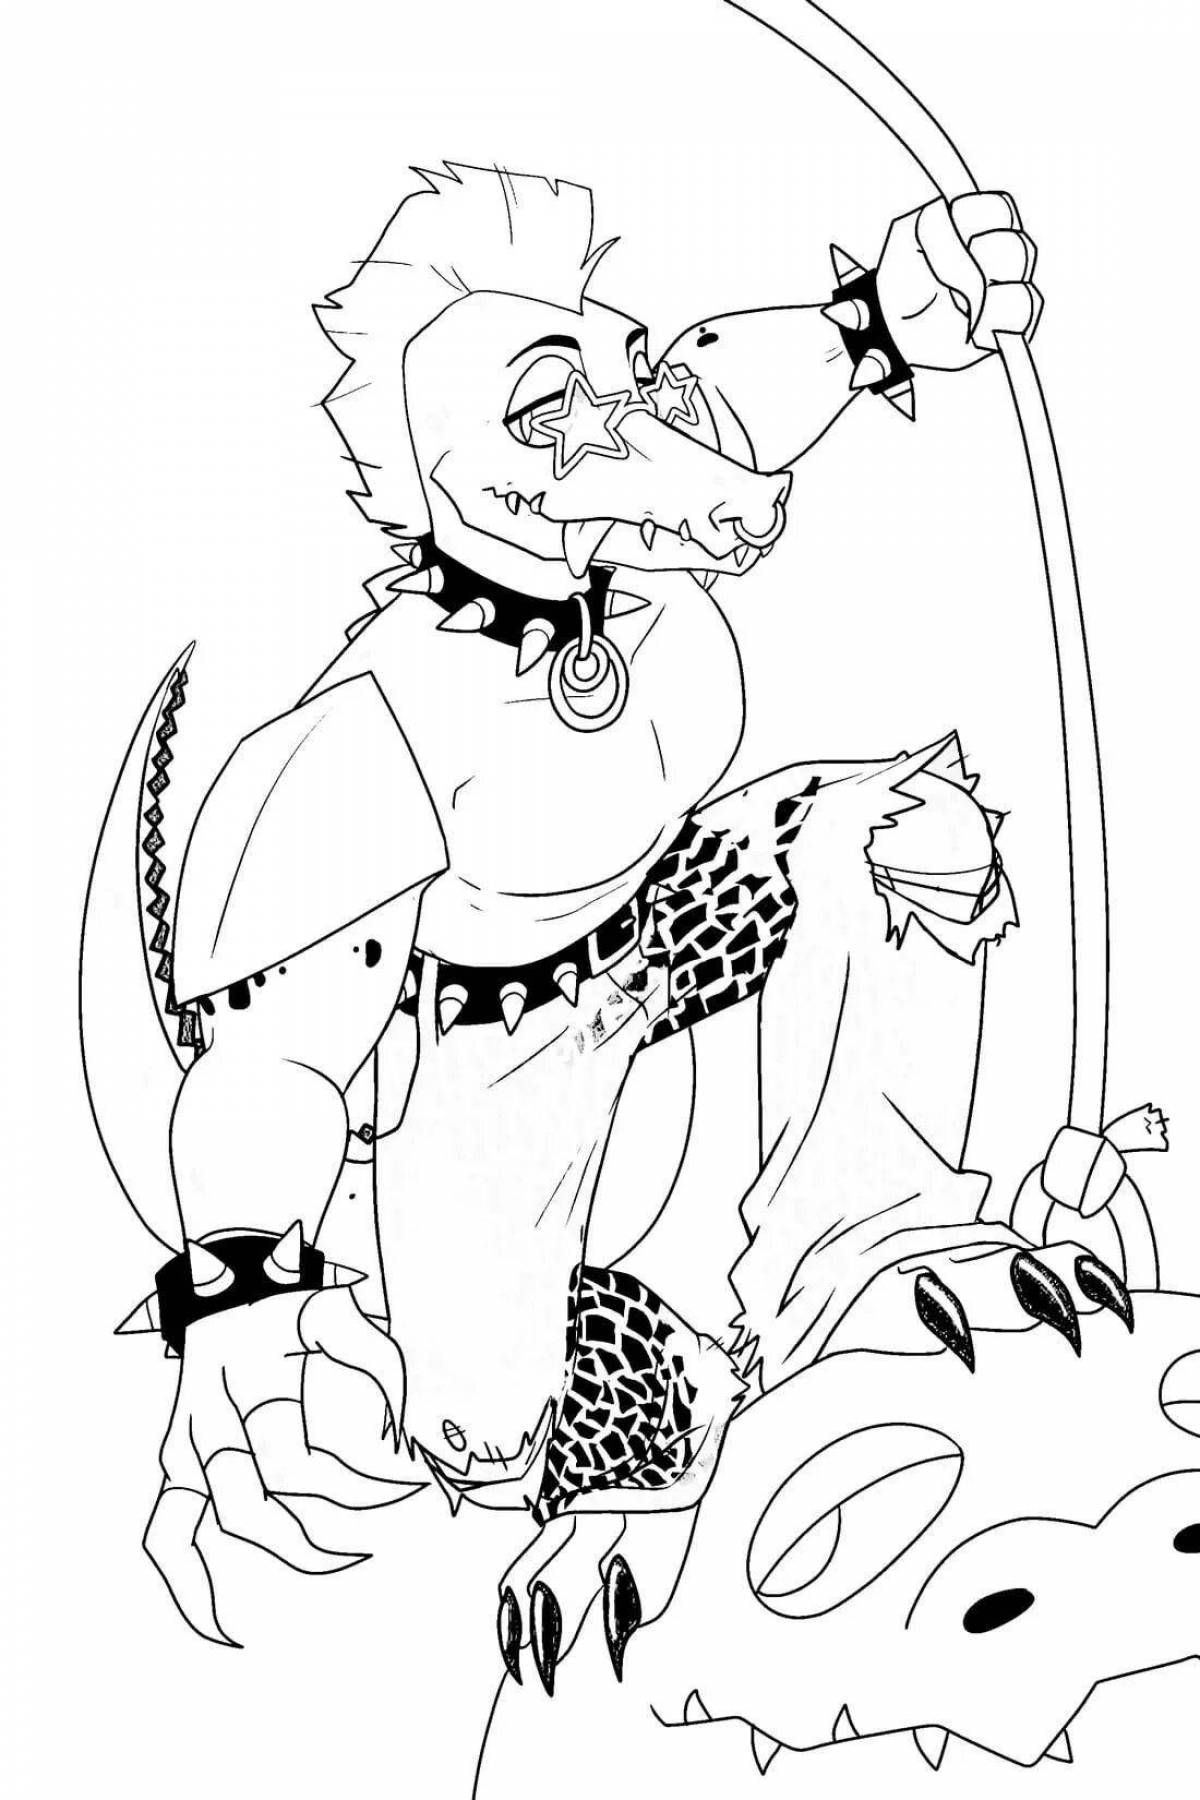 Monty fearless crocodile coloring page